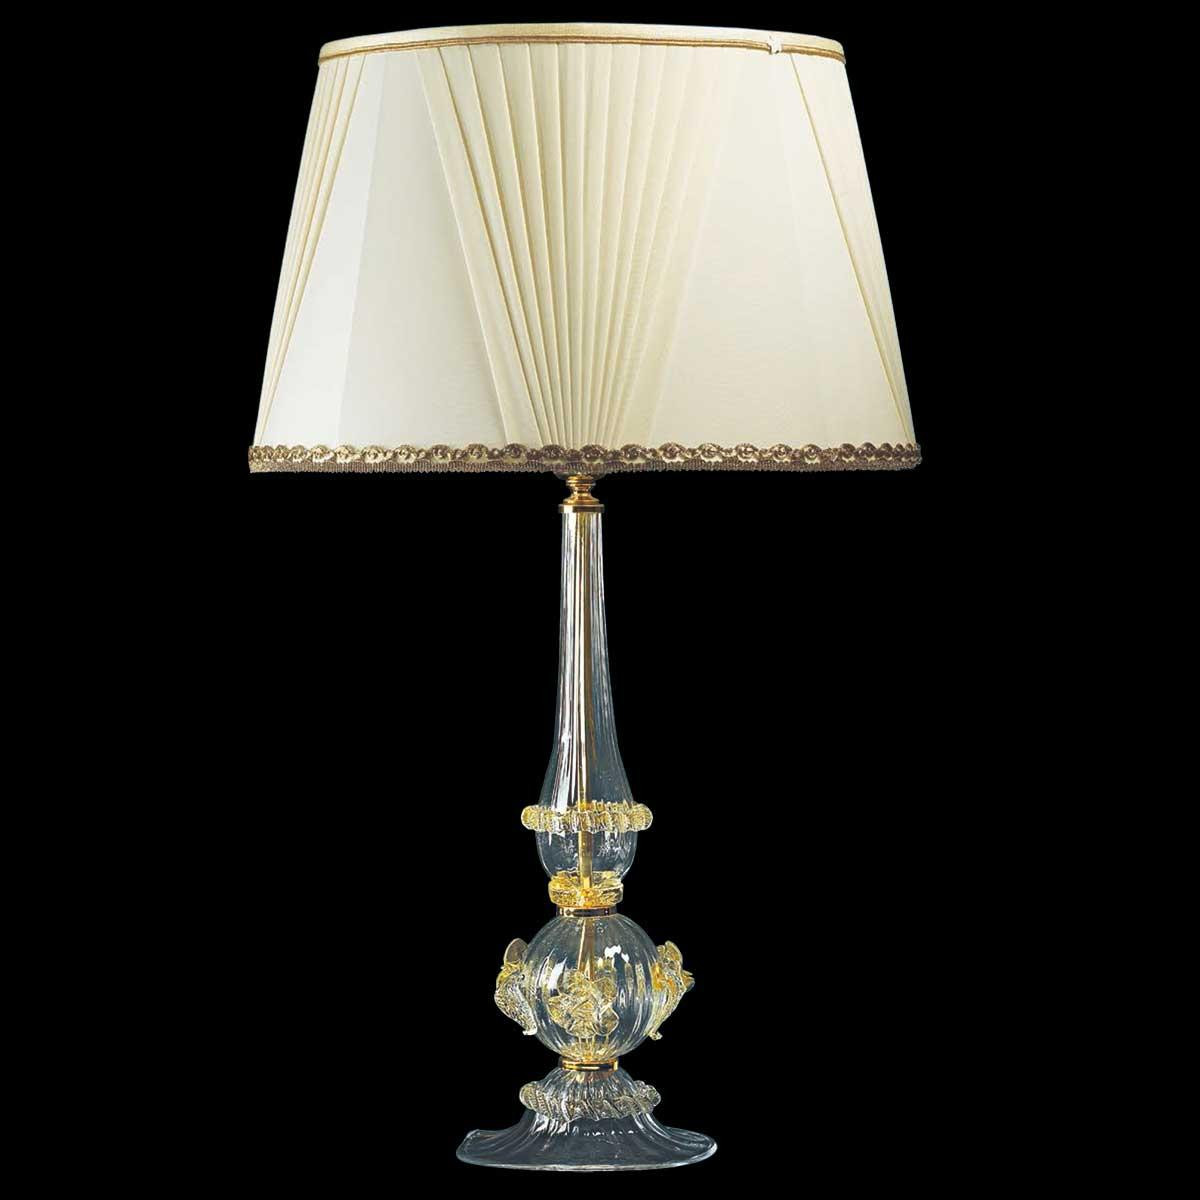 "Ancella" Murano glass table lamp - 1 light - transparent and gold